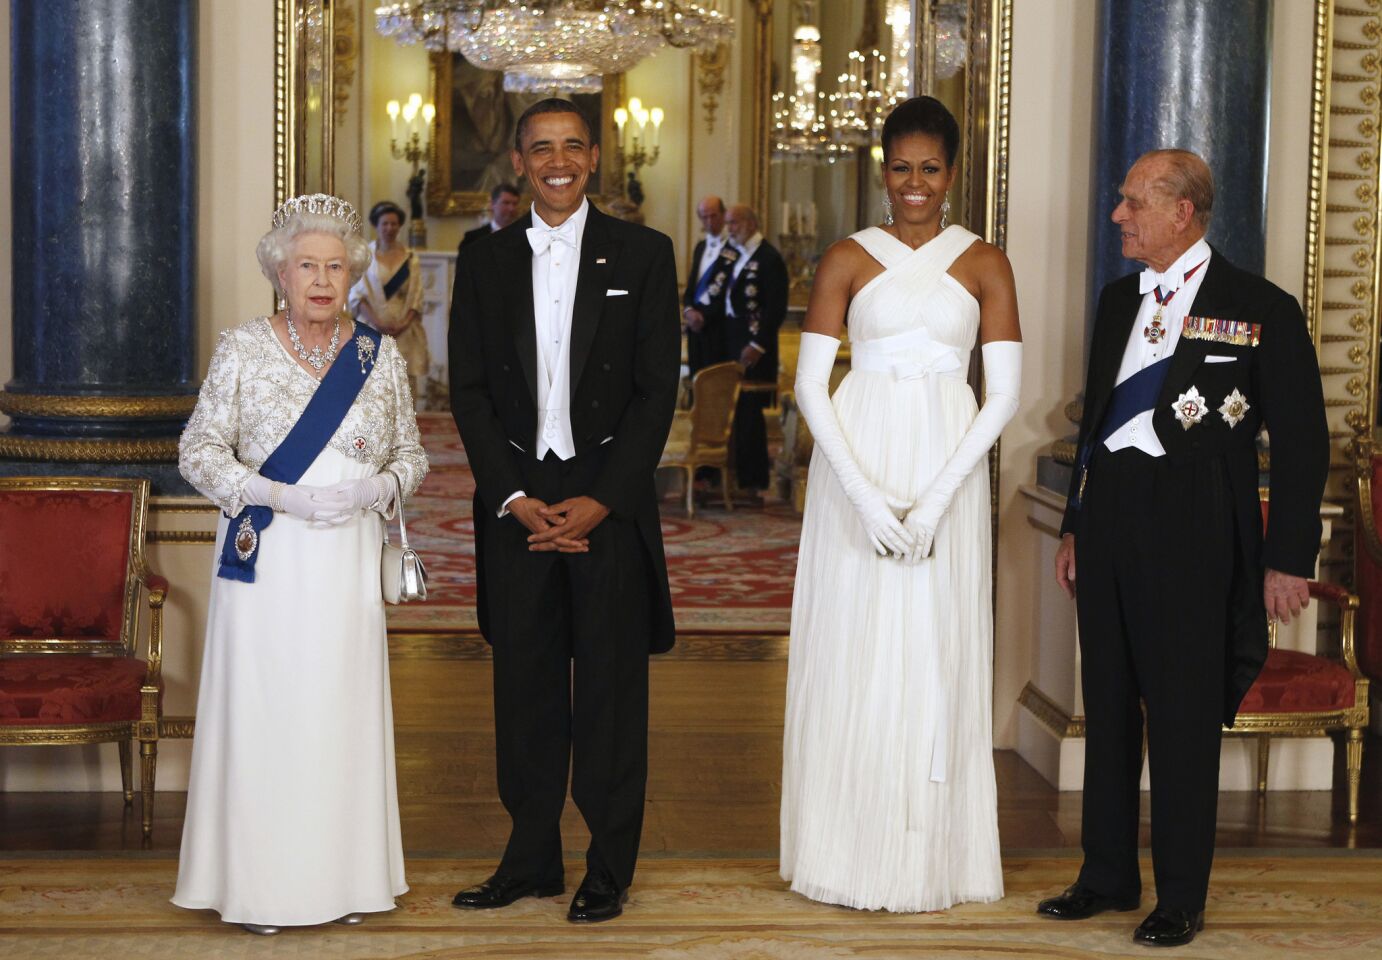 In this May 24, 2011, photo with Queen Elizabeth II, President Barack Obama and Prince Philip at Buckingham Palace, Michelle Obama is wearing a white gown by American designer Tom Ford, who has a home in London.